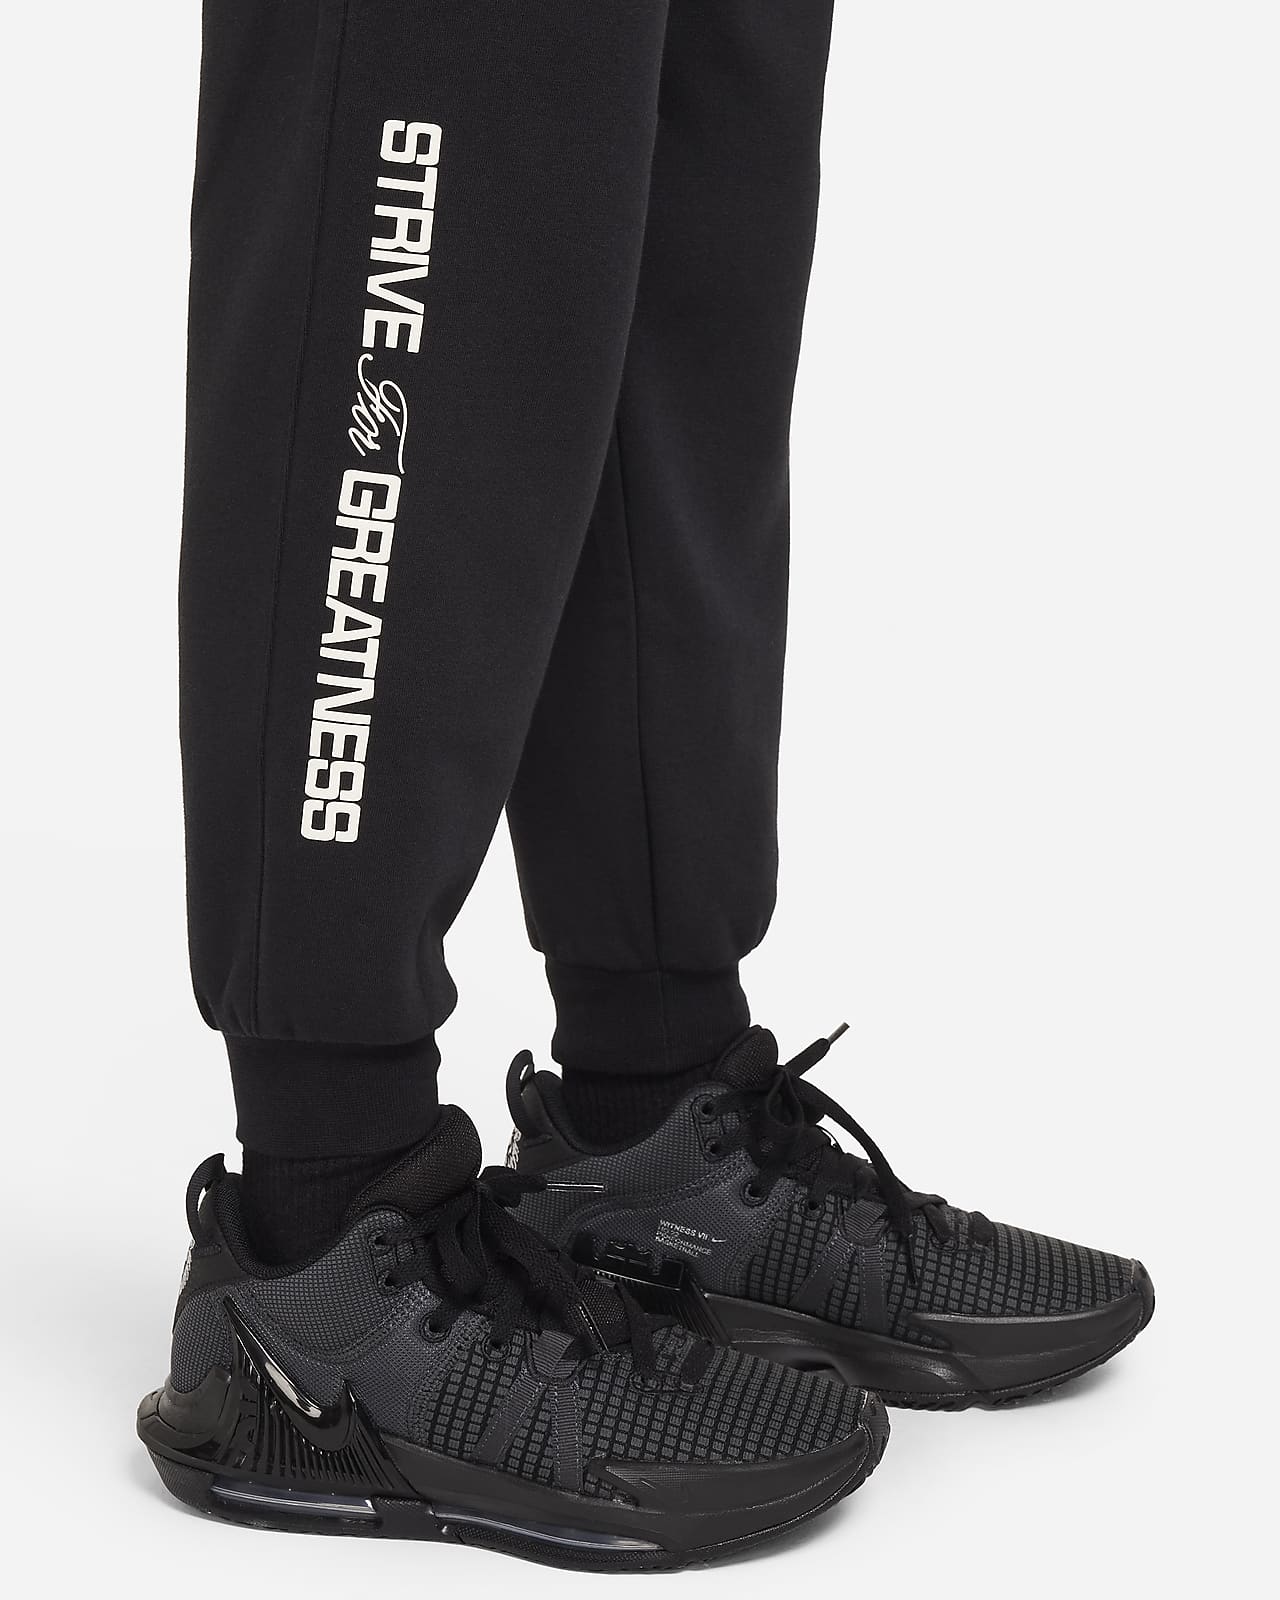 how to get kanye west sold out adidas yeezy calabasas track pants - Black  Pleat - GenesinlifeShops Iceland - front trousers Lanvin